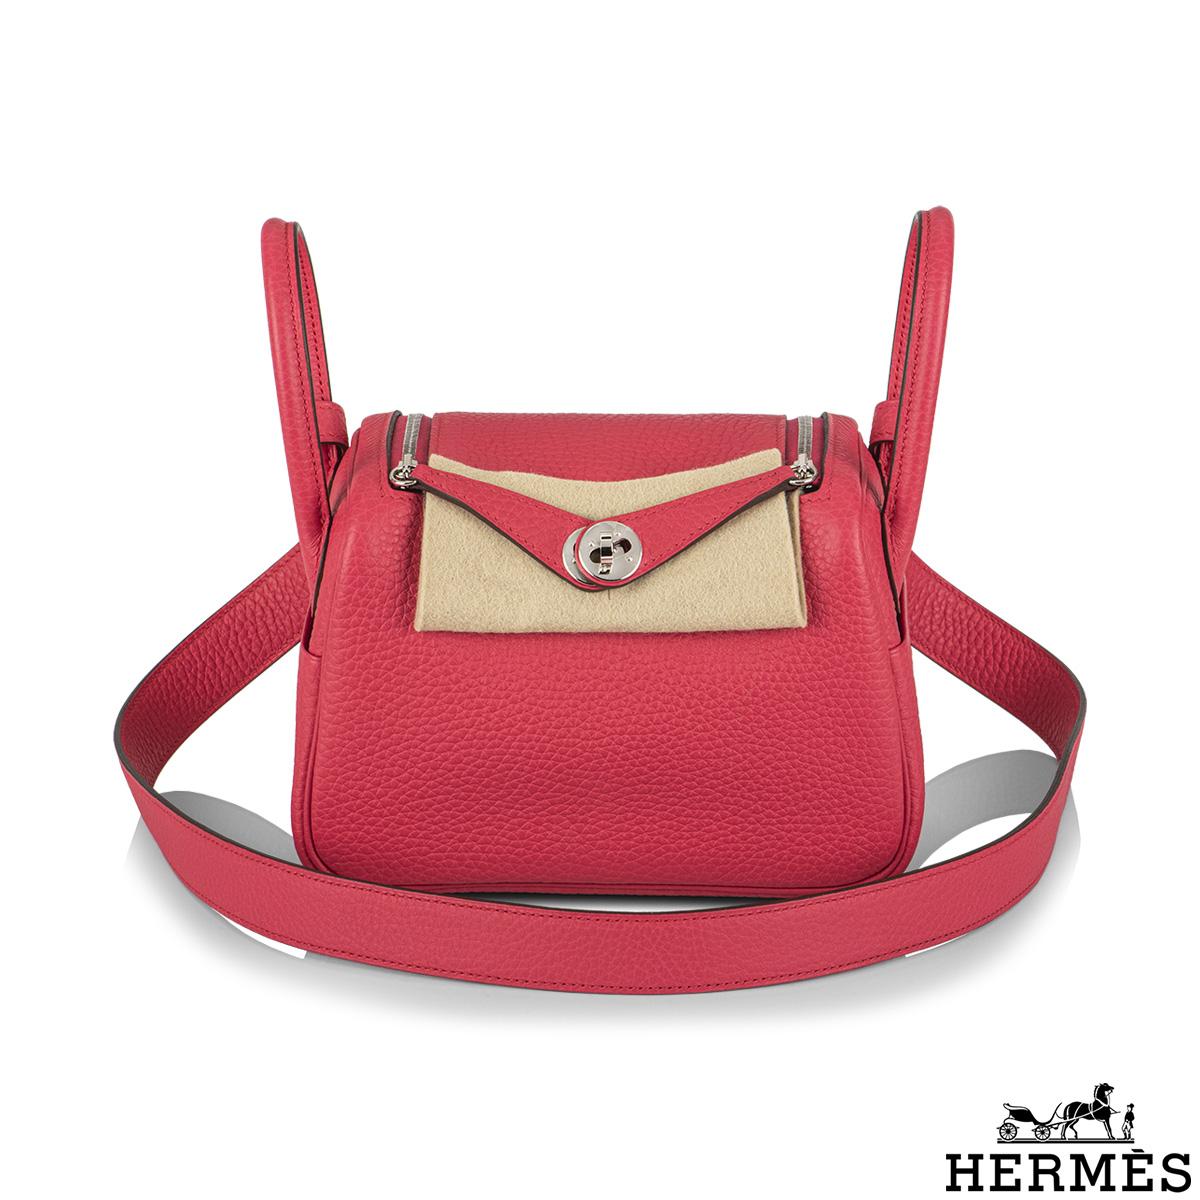 An exquisite And Chic Hermès Mini Lindy. The exterior of this mini Lindy is crafted with rose extreme clemence leather with palladium hardware. It features tonal stitching, double zipper pulls, front Hermès twist lock, single pocket on each side,